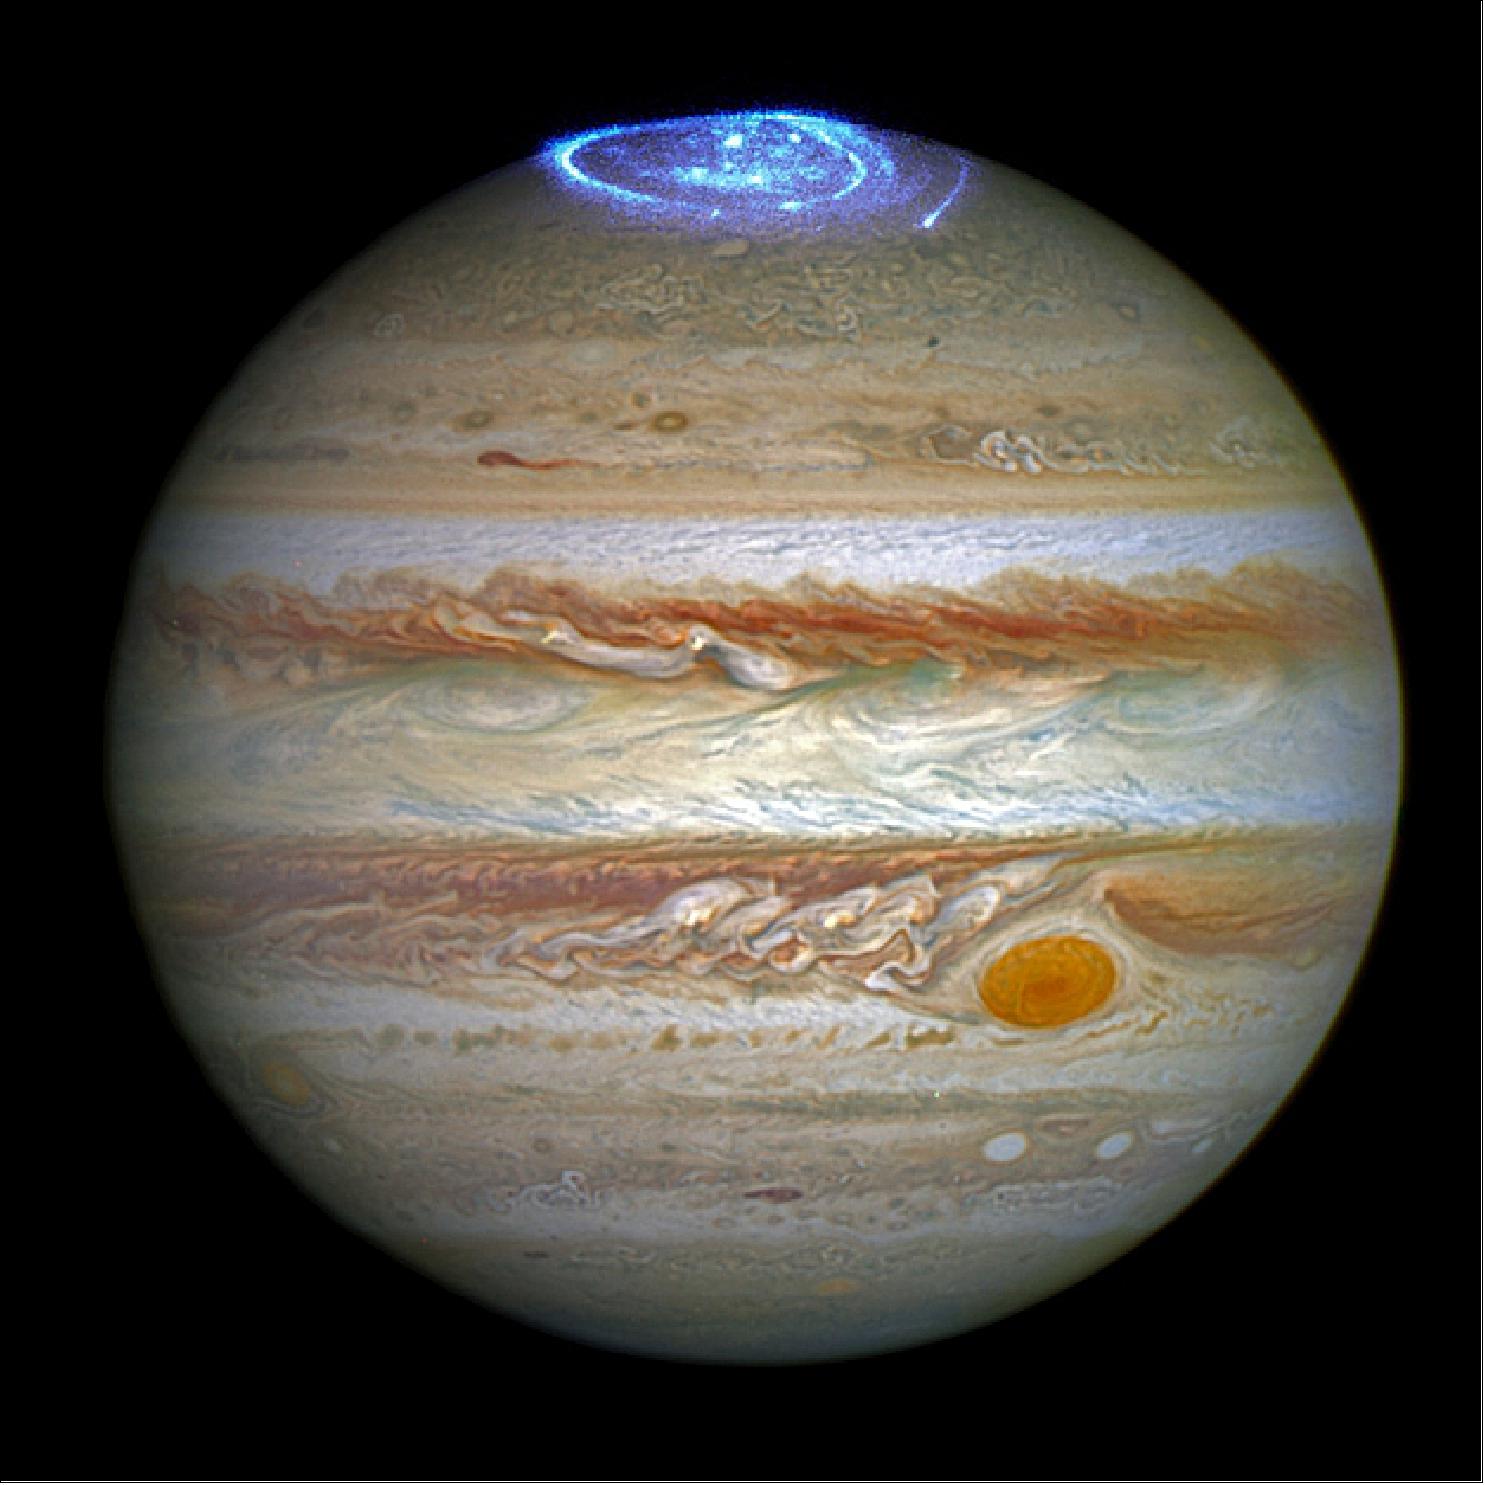 Figure 92: The Hubble Space Telescope depicts Jupiter (image credit: NASA, ESA, and J. Nichols (University of Leicester))